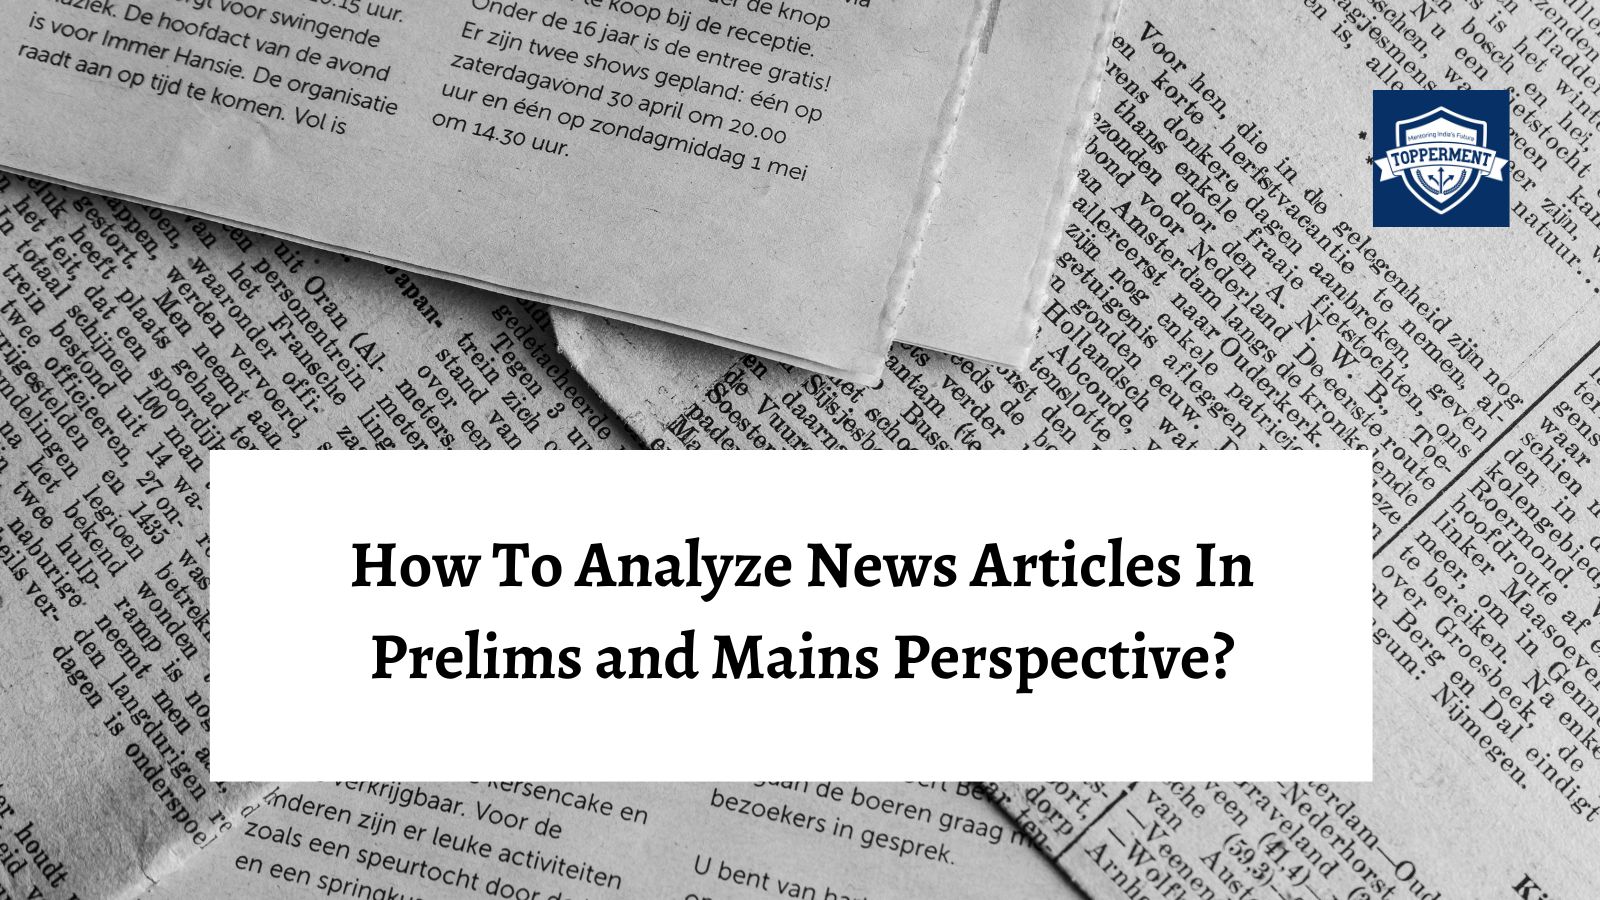 How to analyze news articles in prelims and mains perspective?-TopperMent